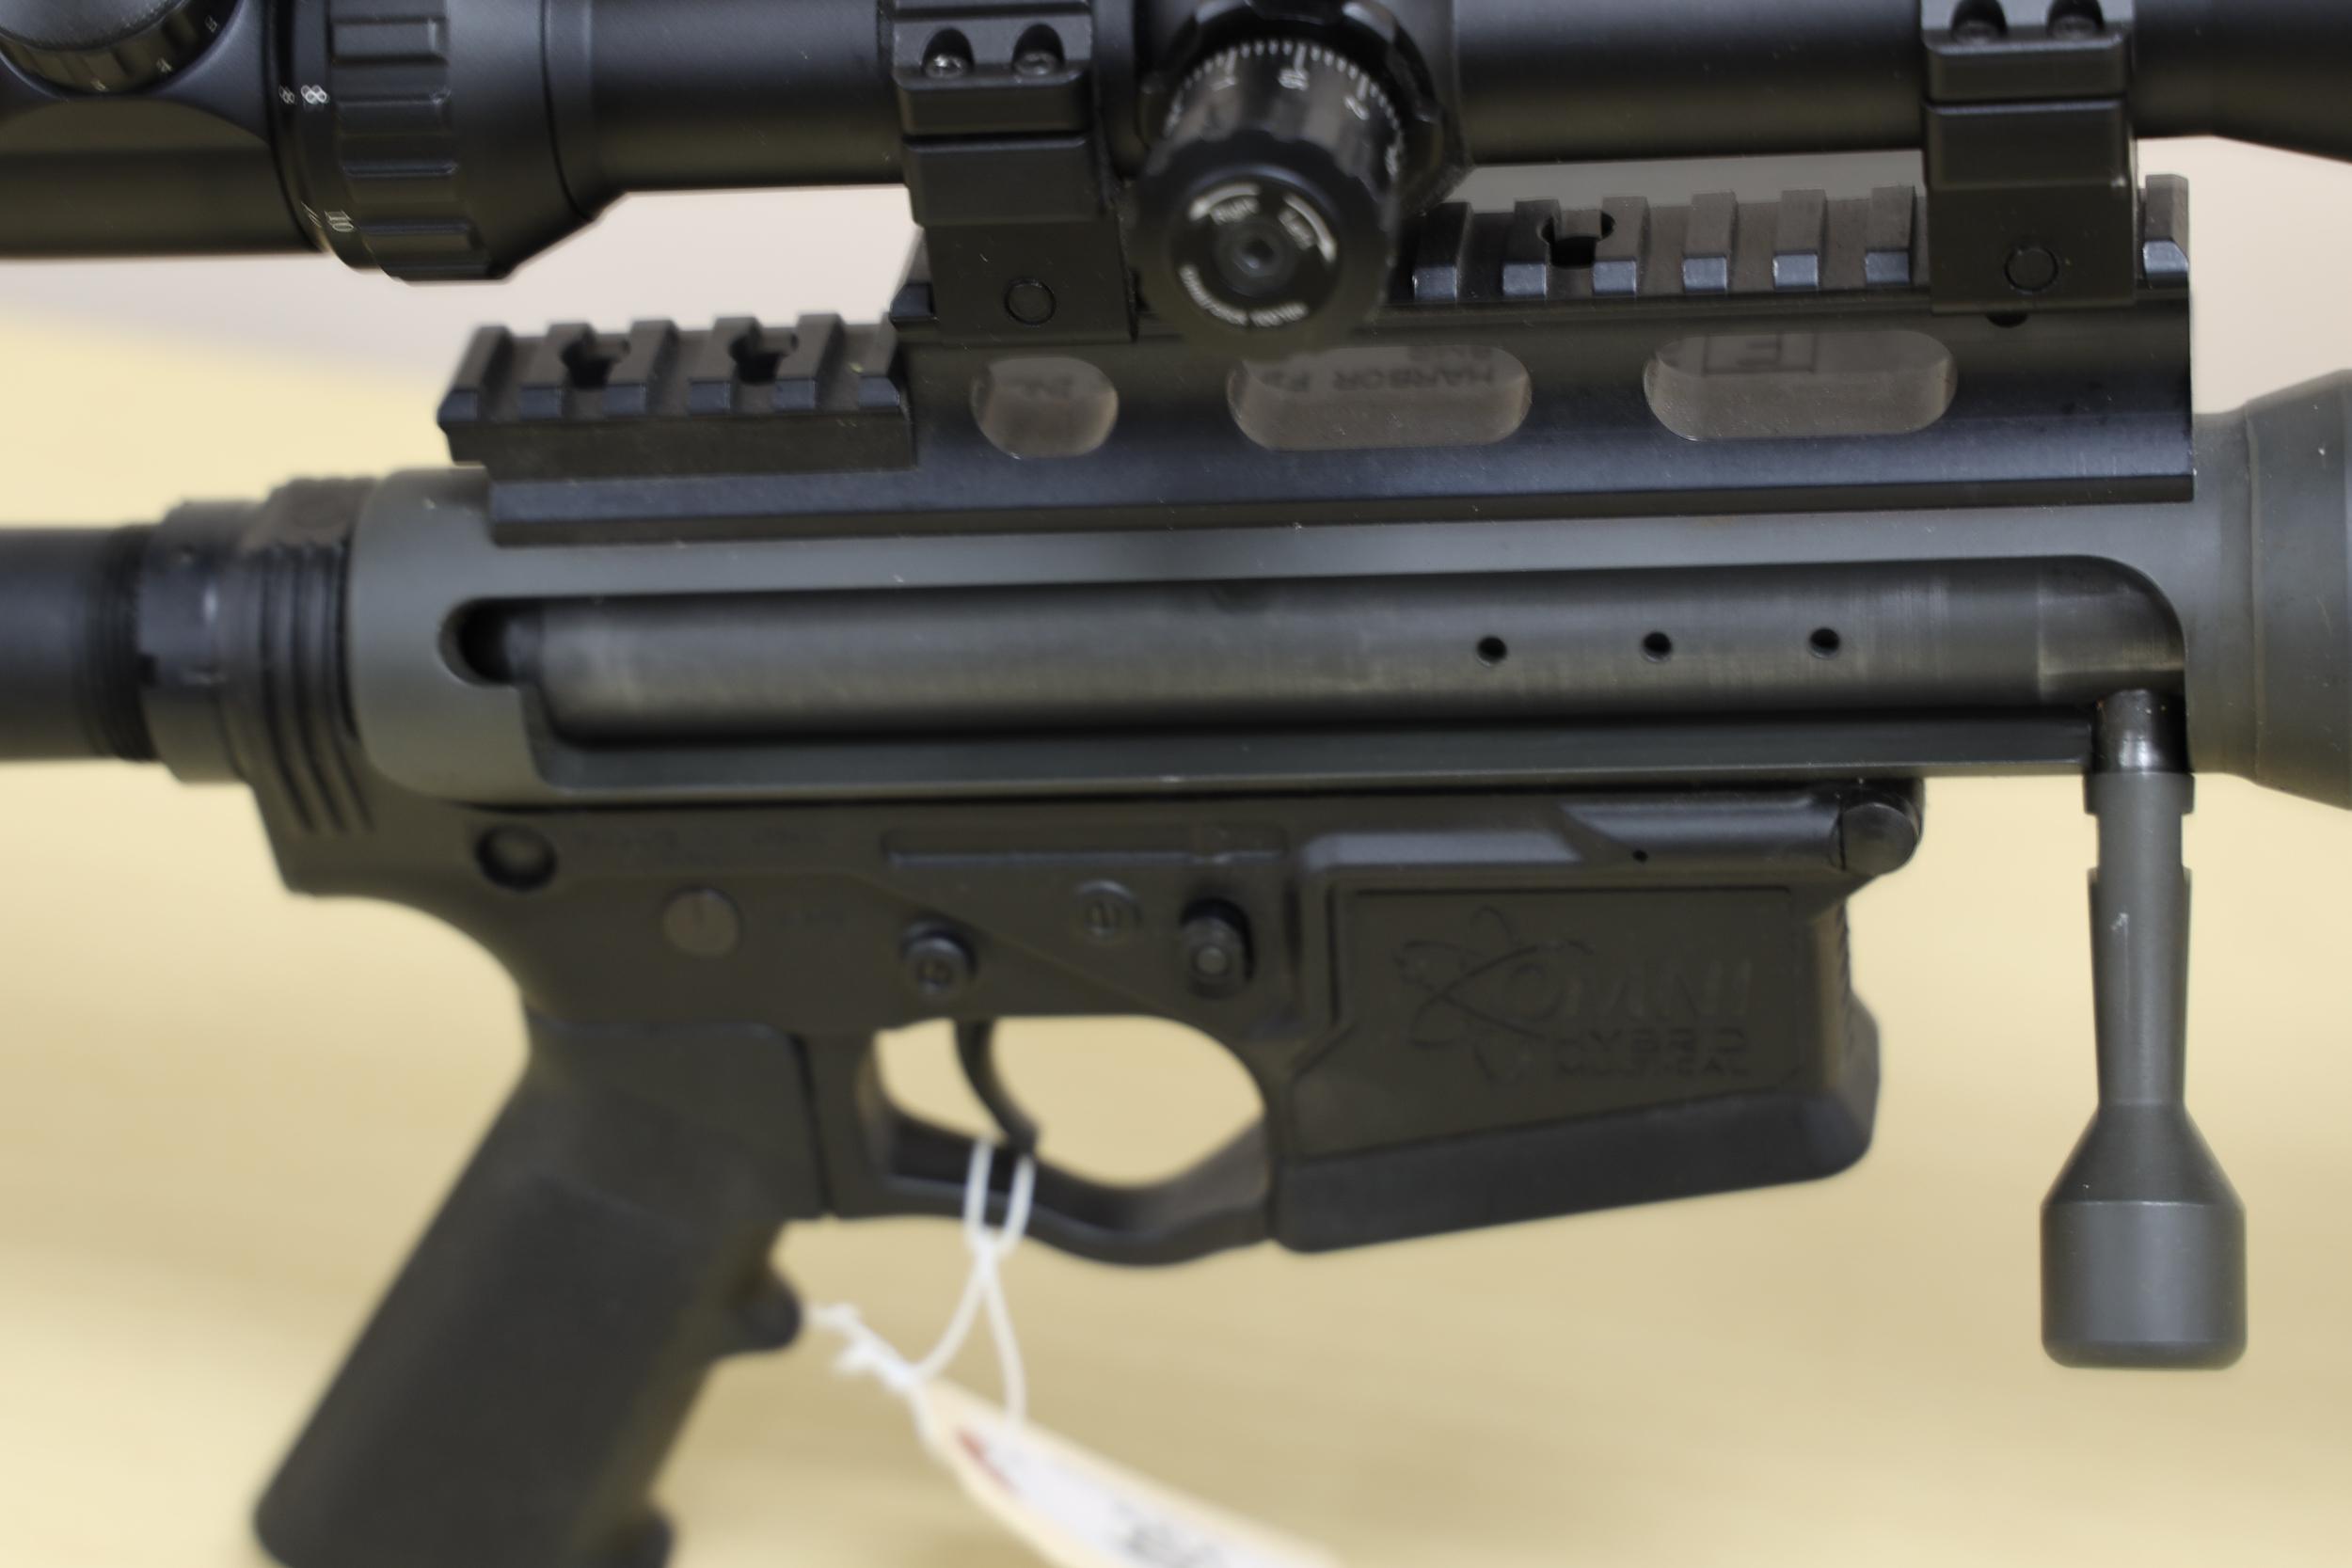 American Tactical Imports  Bolt Rifle .50 BMG